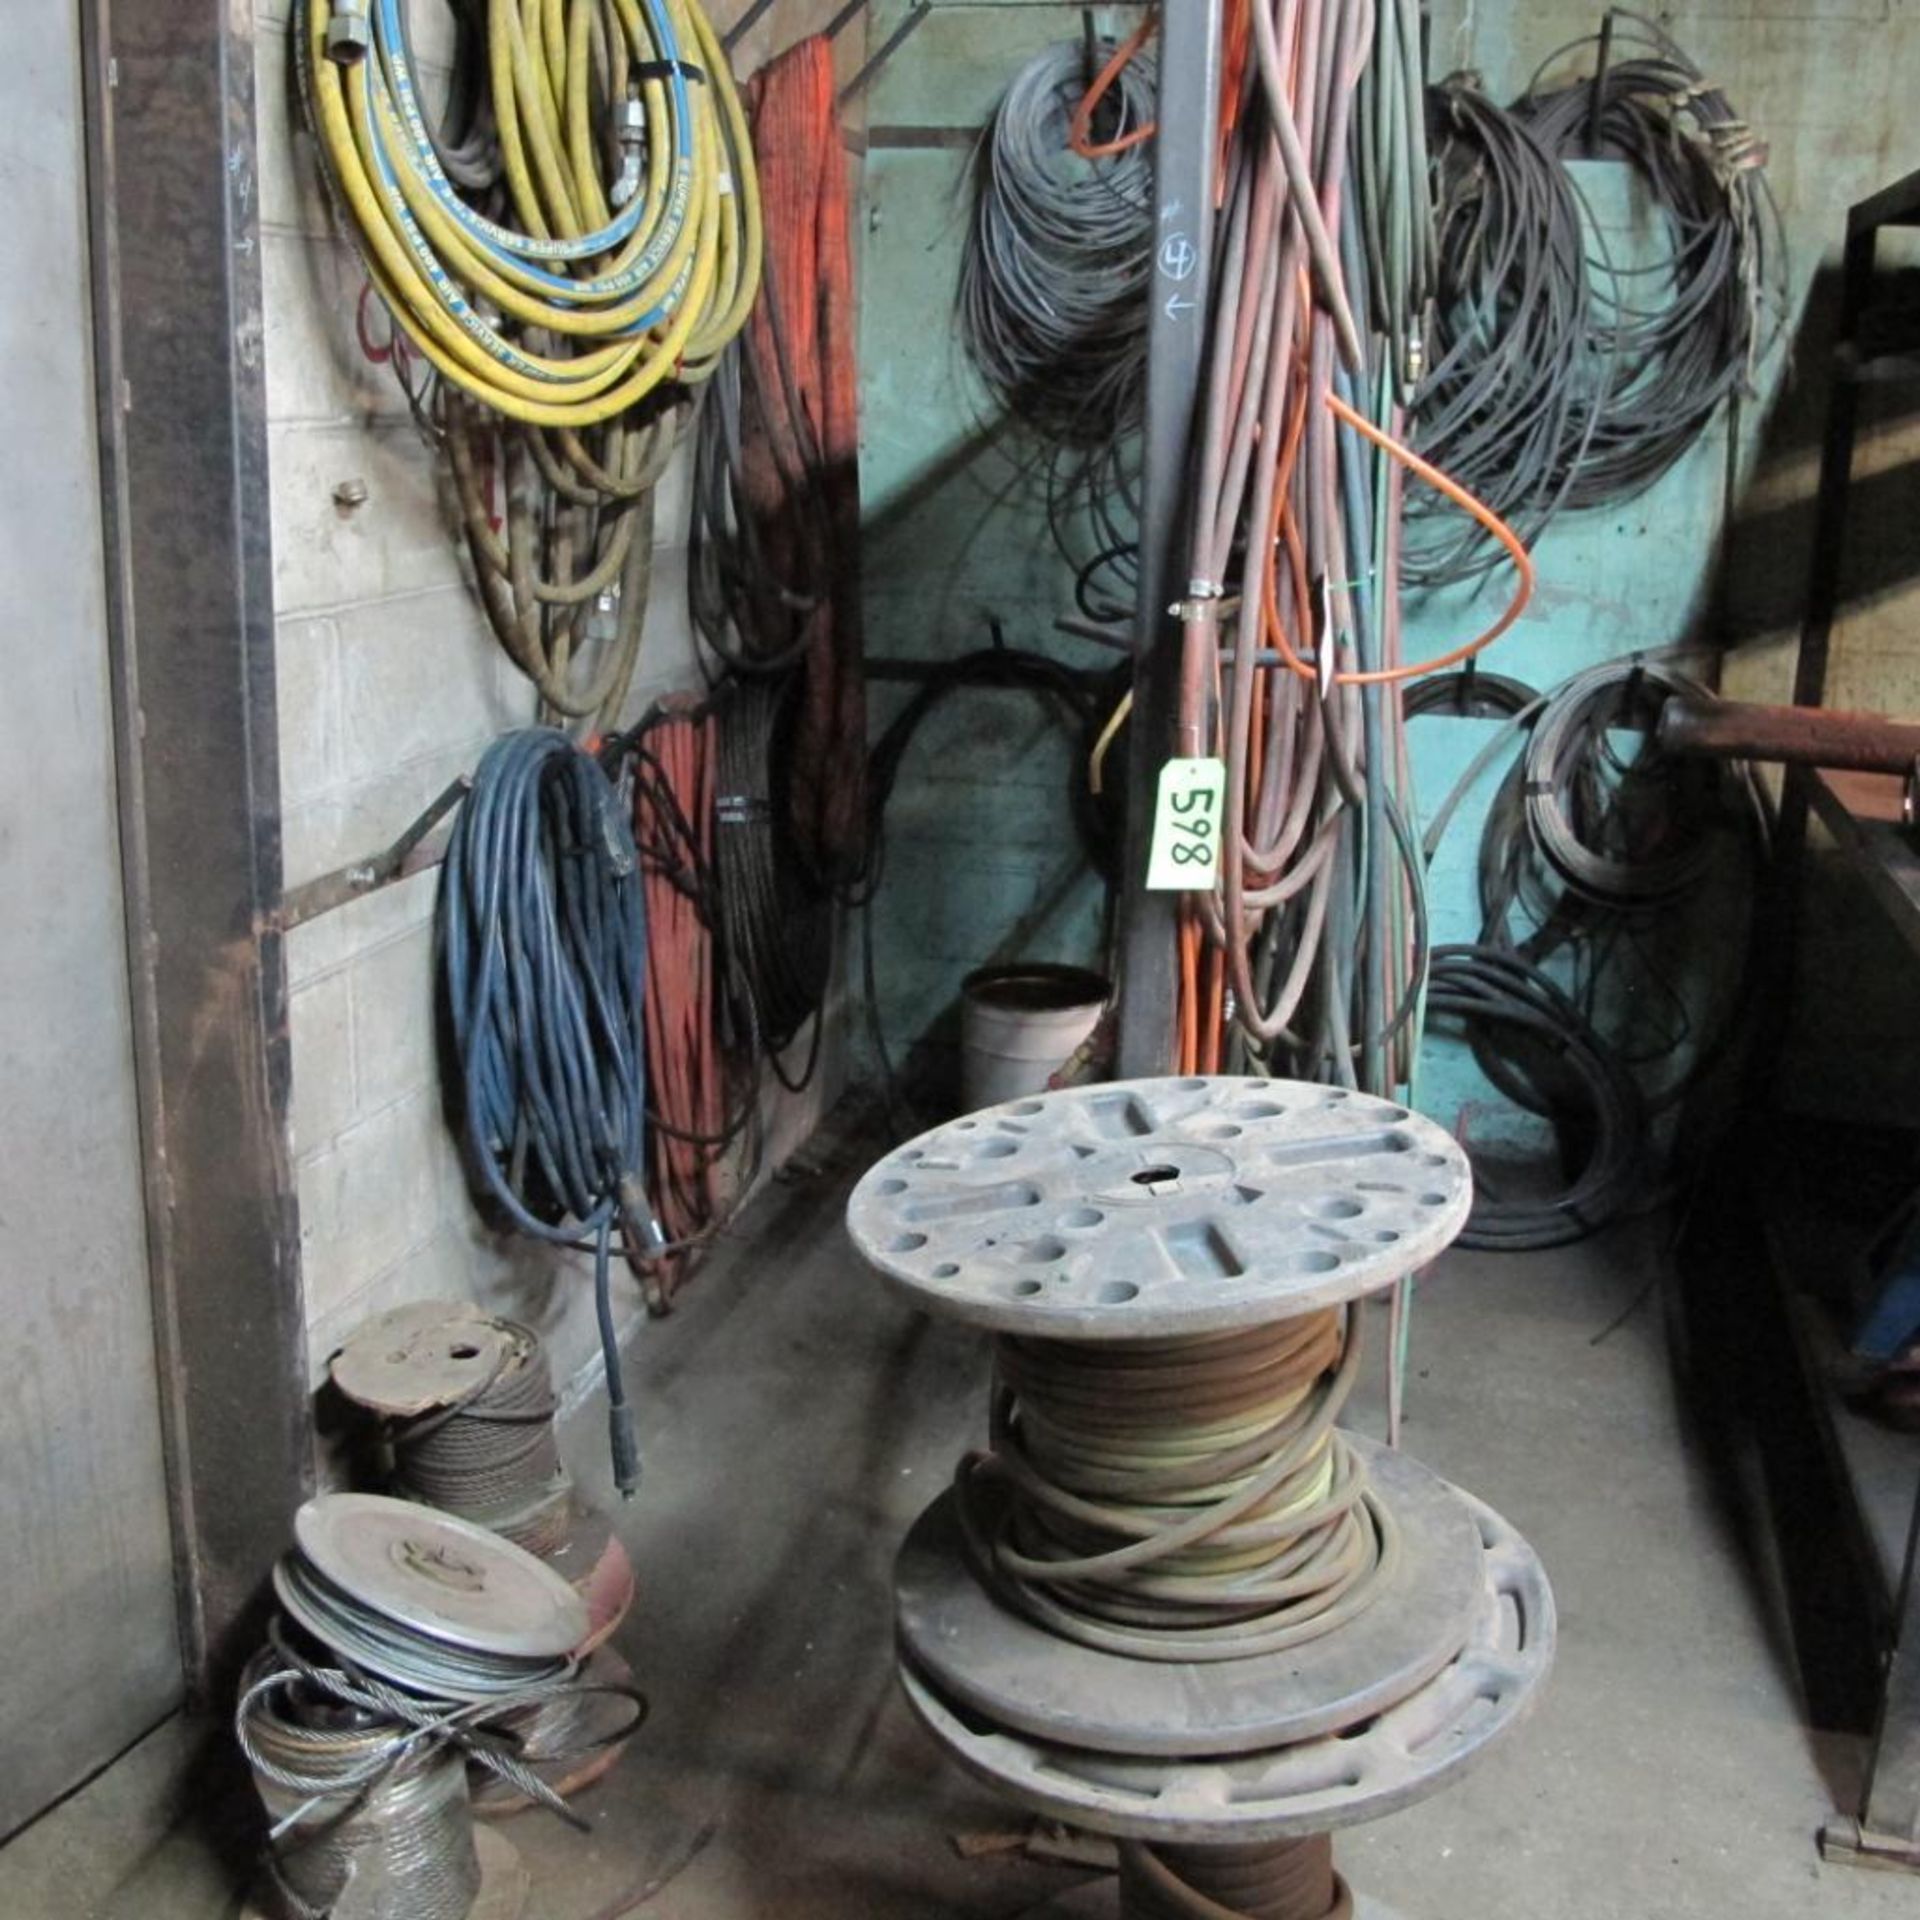 LOT OF HANGING CABLES, WIRE SLINGS, HOSES, STEEL CABLES, WIRE REELS AND HOSES (LOWER CRIB)